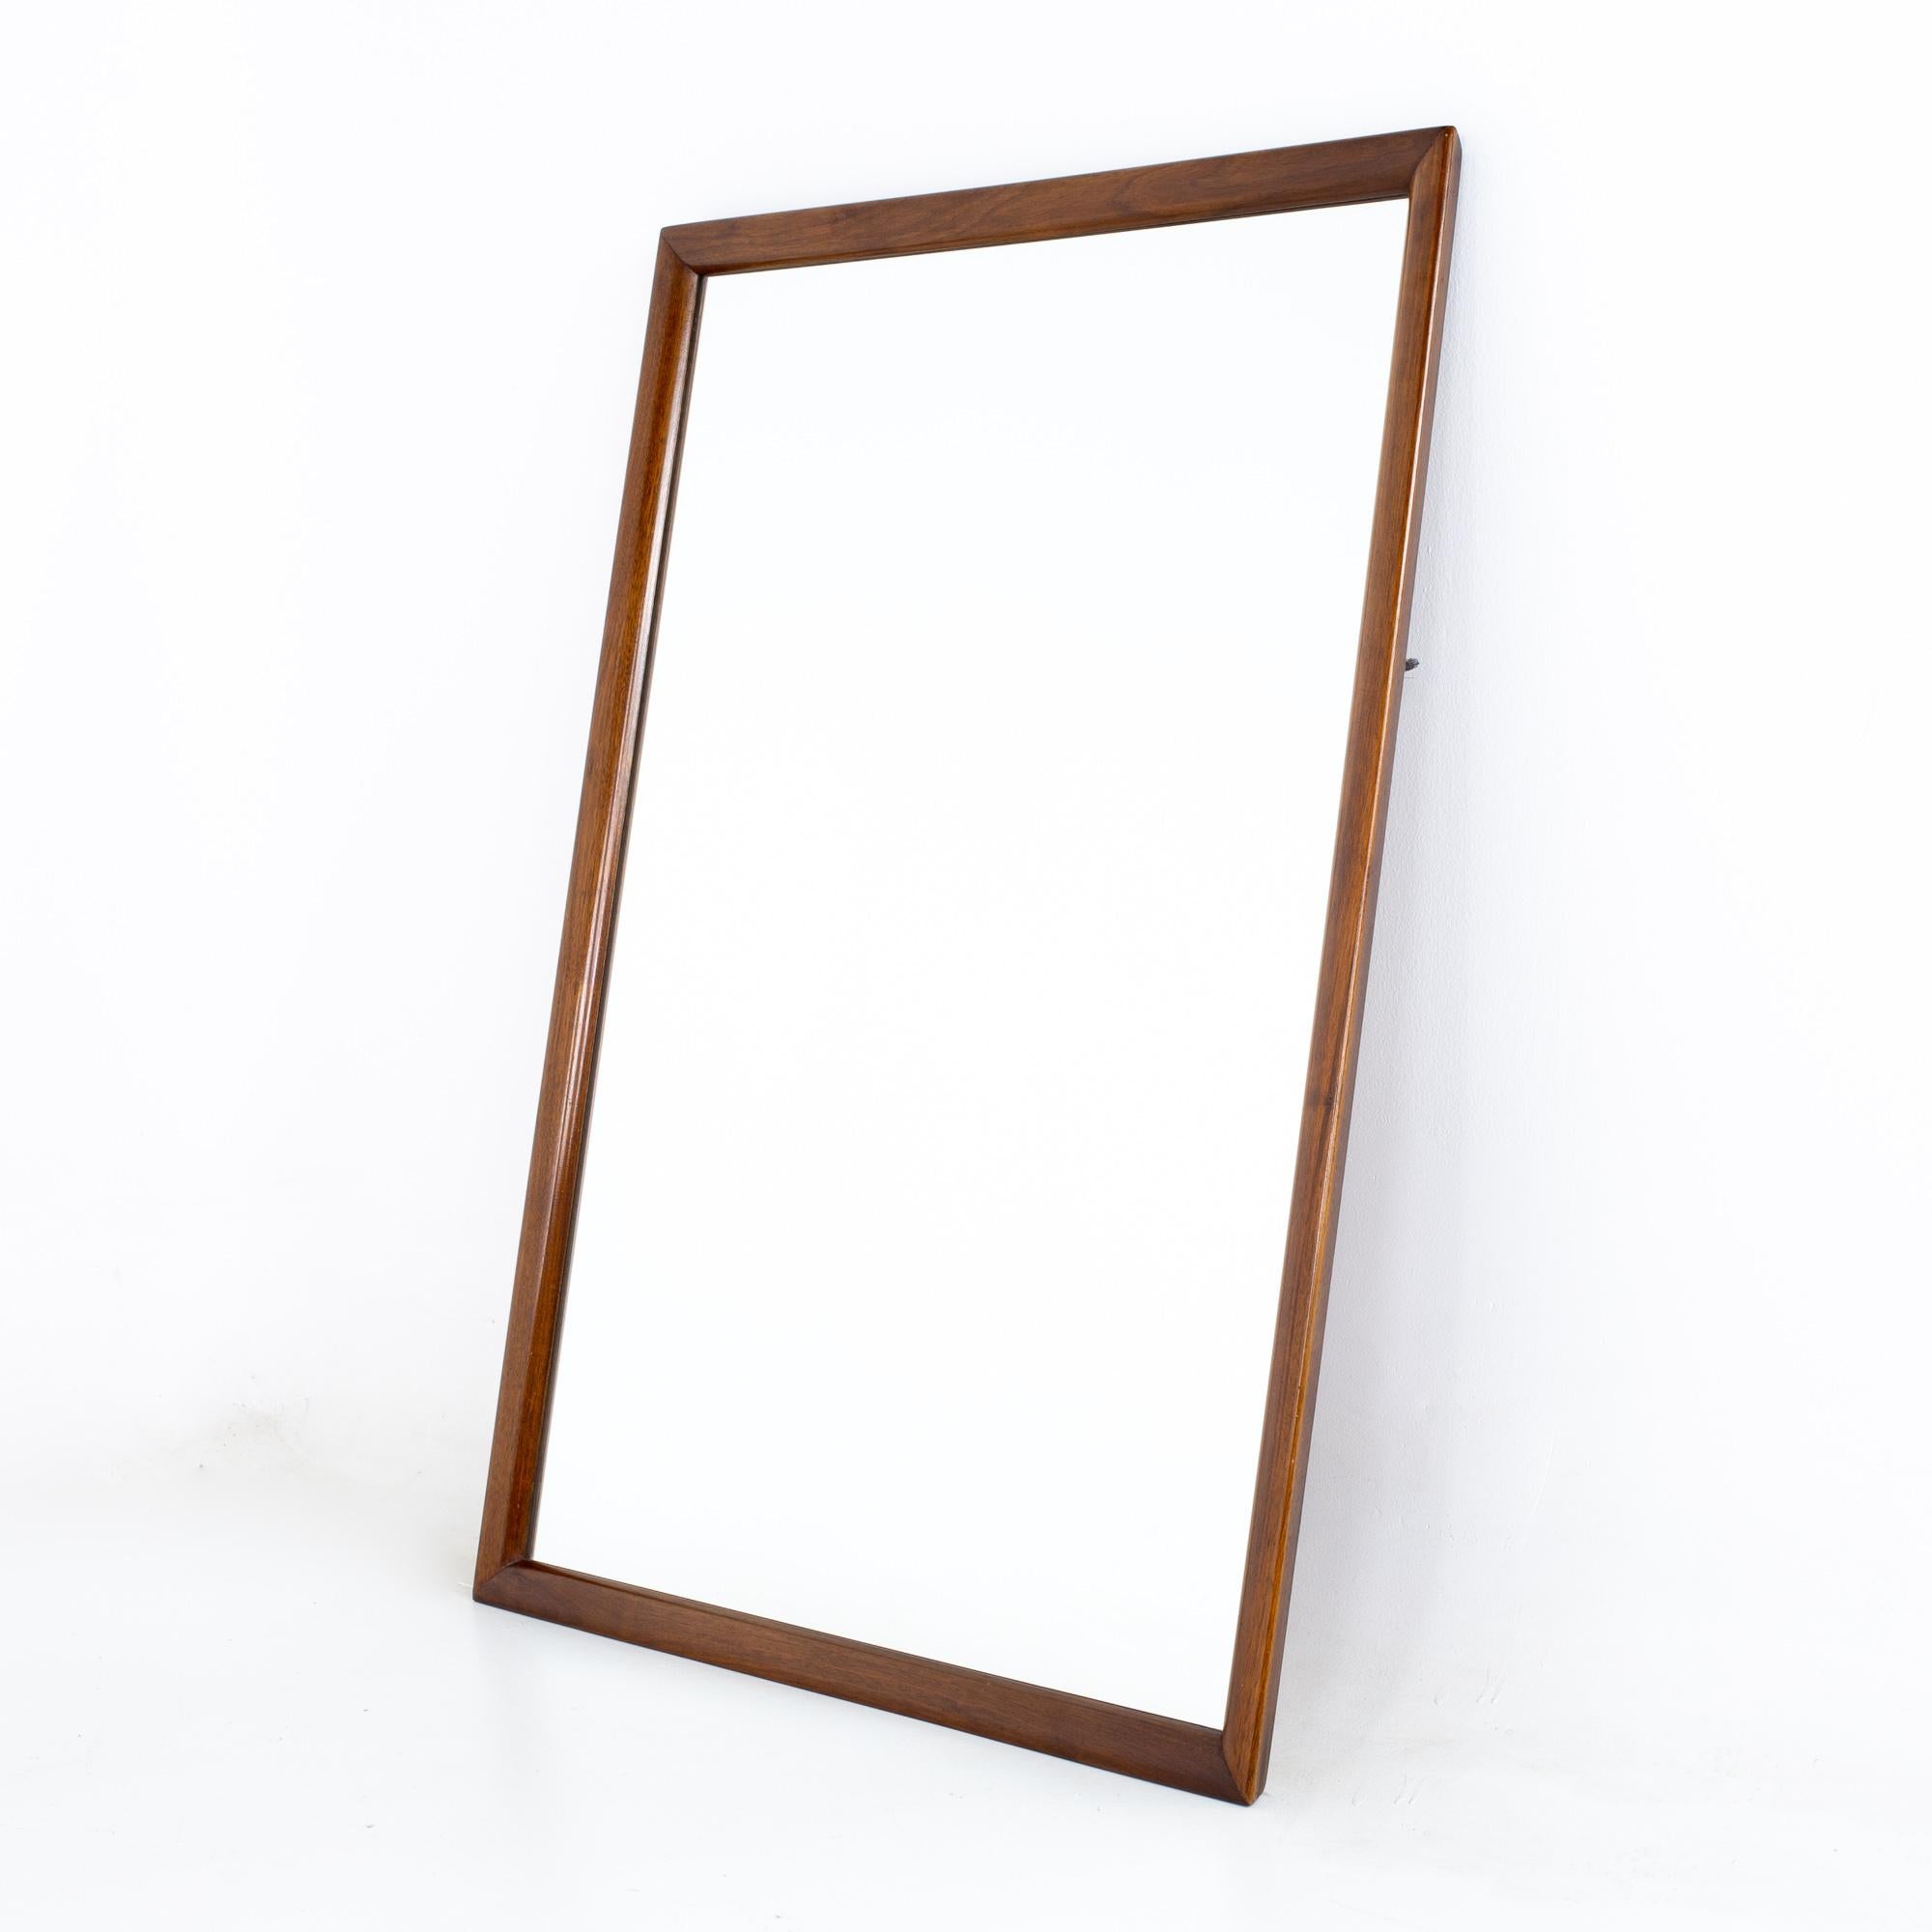 Merton Gershun for American of Martinsville mid century walnut mirror.
Mirror measures: 32.5 wide x 1.5 deep x 46.75 inches high

All pieces of furniture can be had in what we call restored vintage condition. That means the piece is restored upon